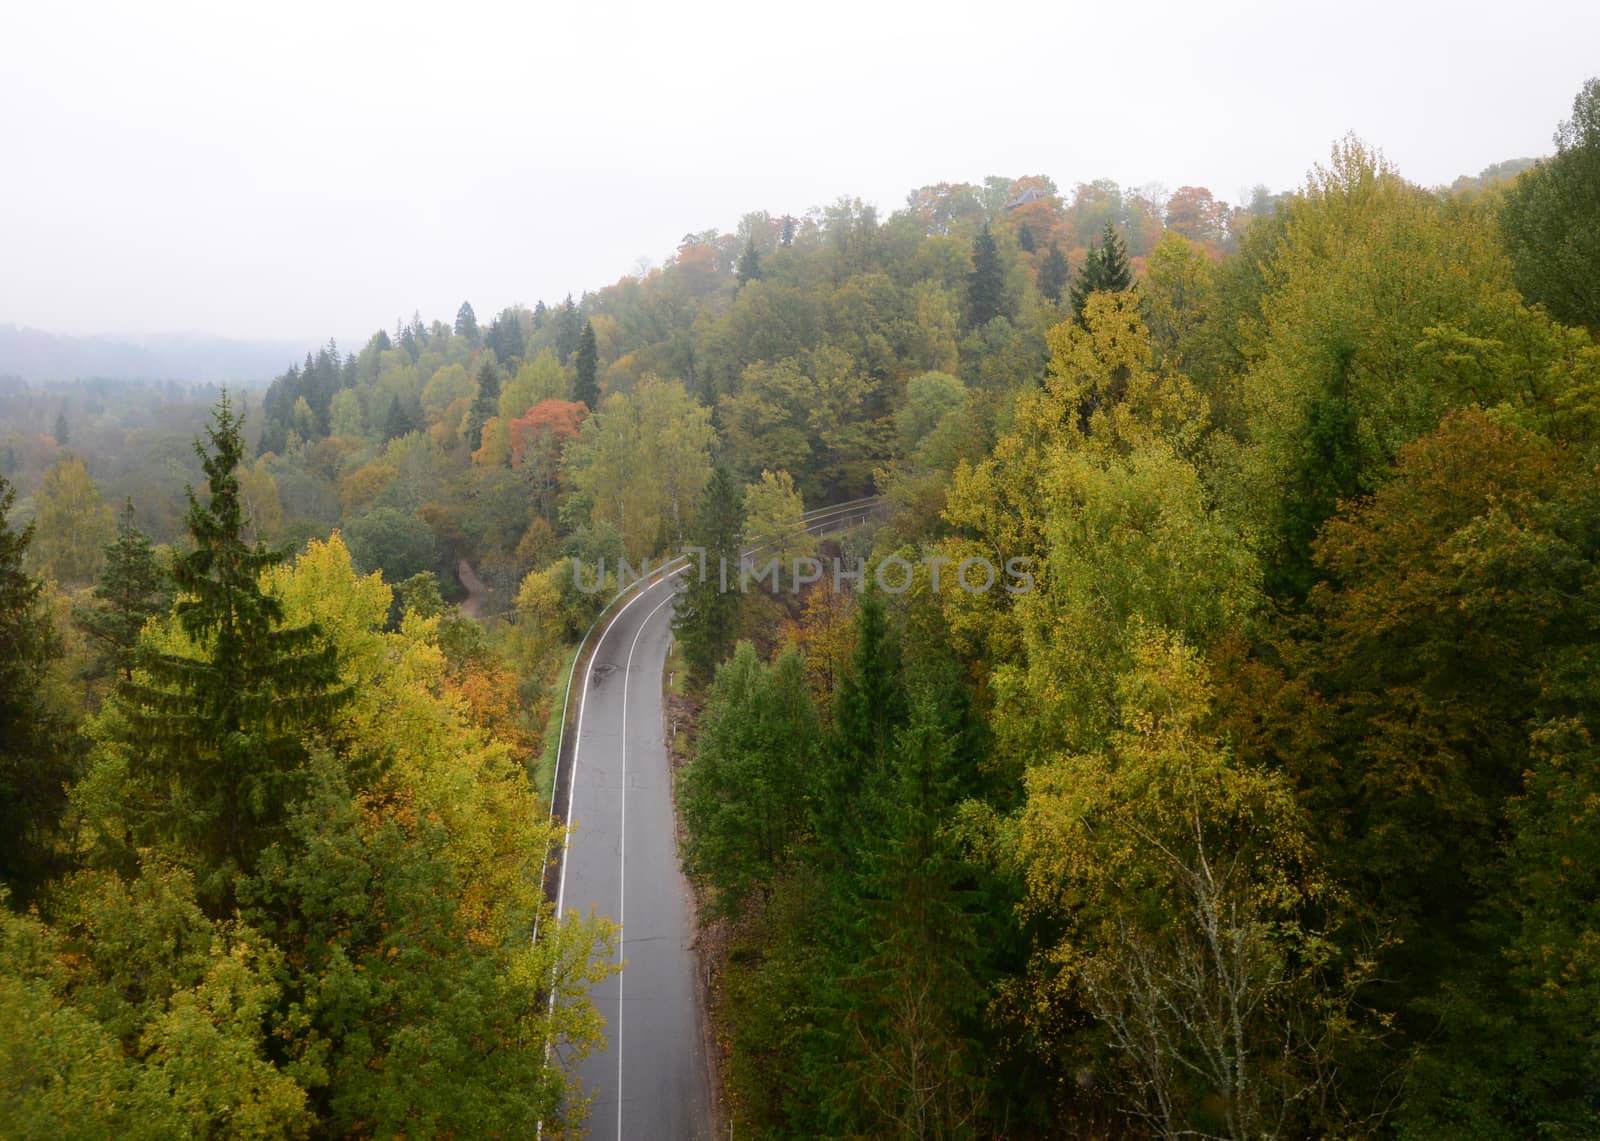 Photo of a road in the forest. View from a big height. Nature photography. Taken in Sigulda, Latvia.